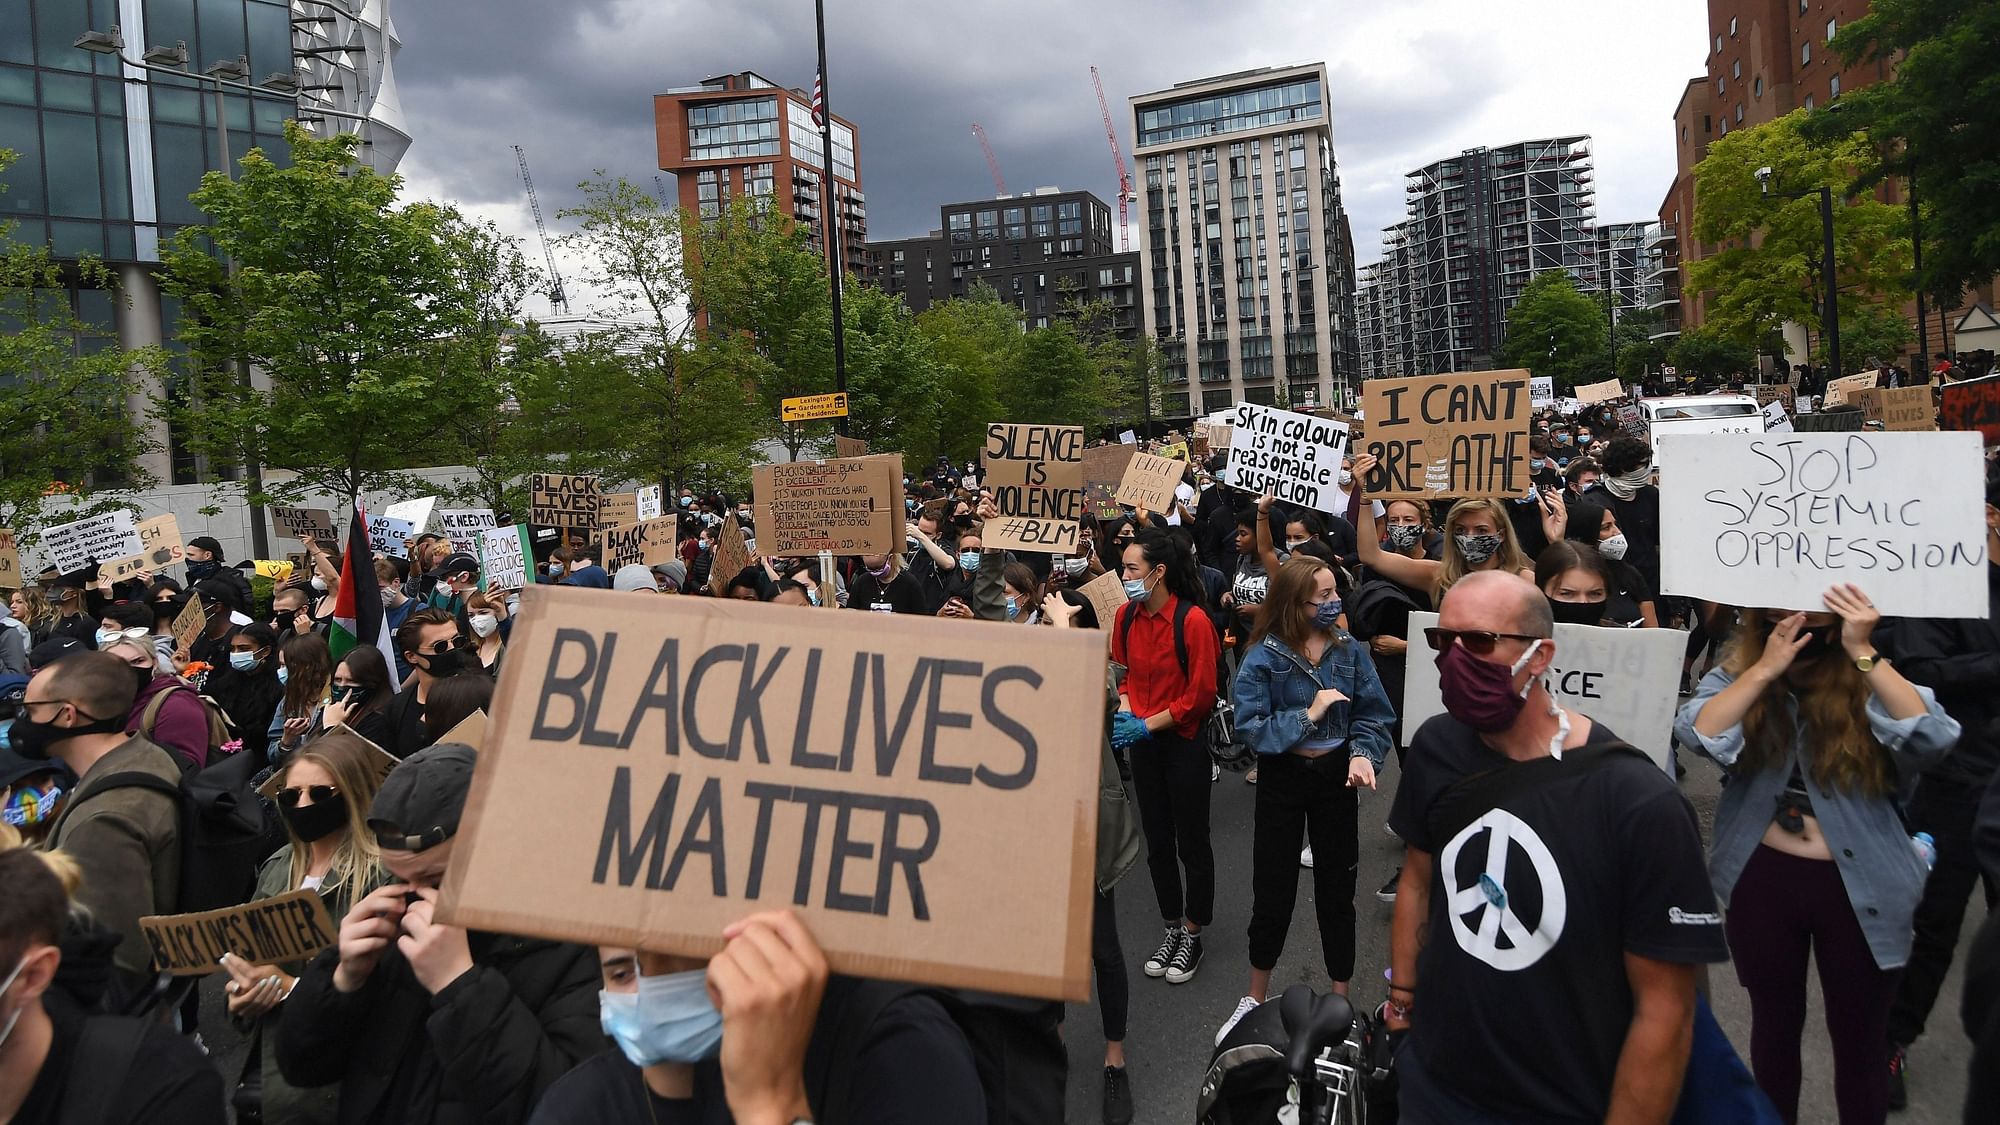 Image of a Black Lives Matter protest used for representational  purposes.